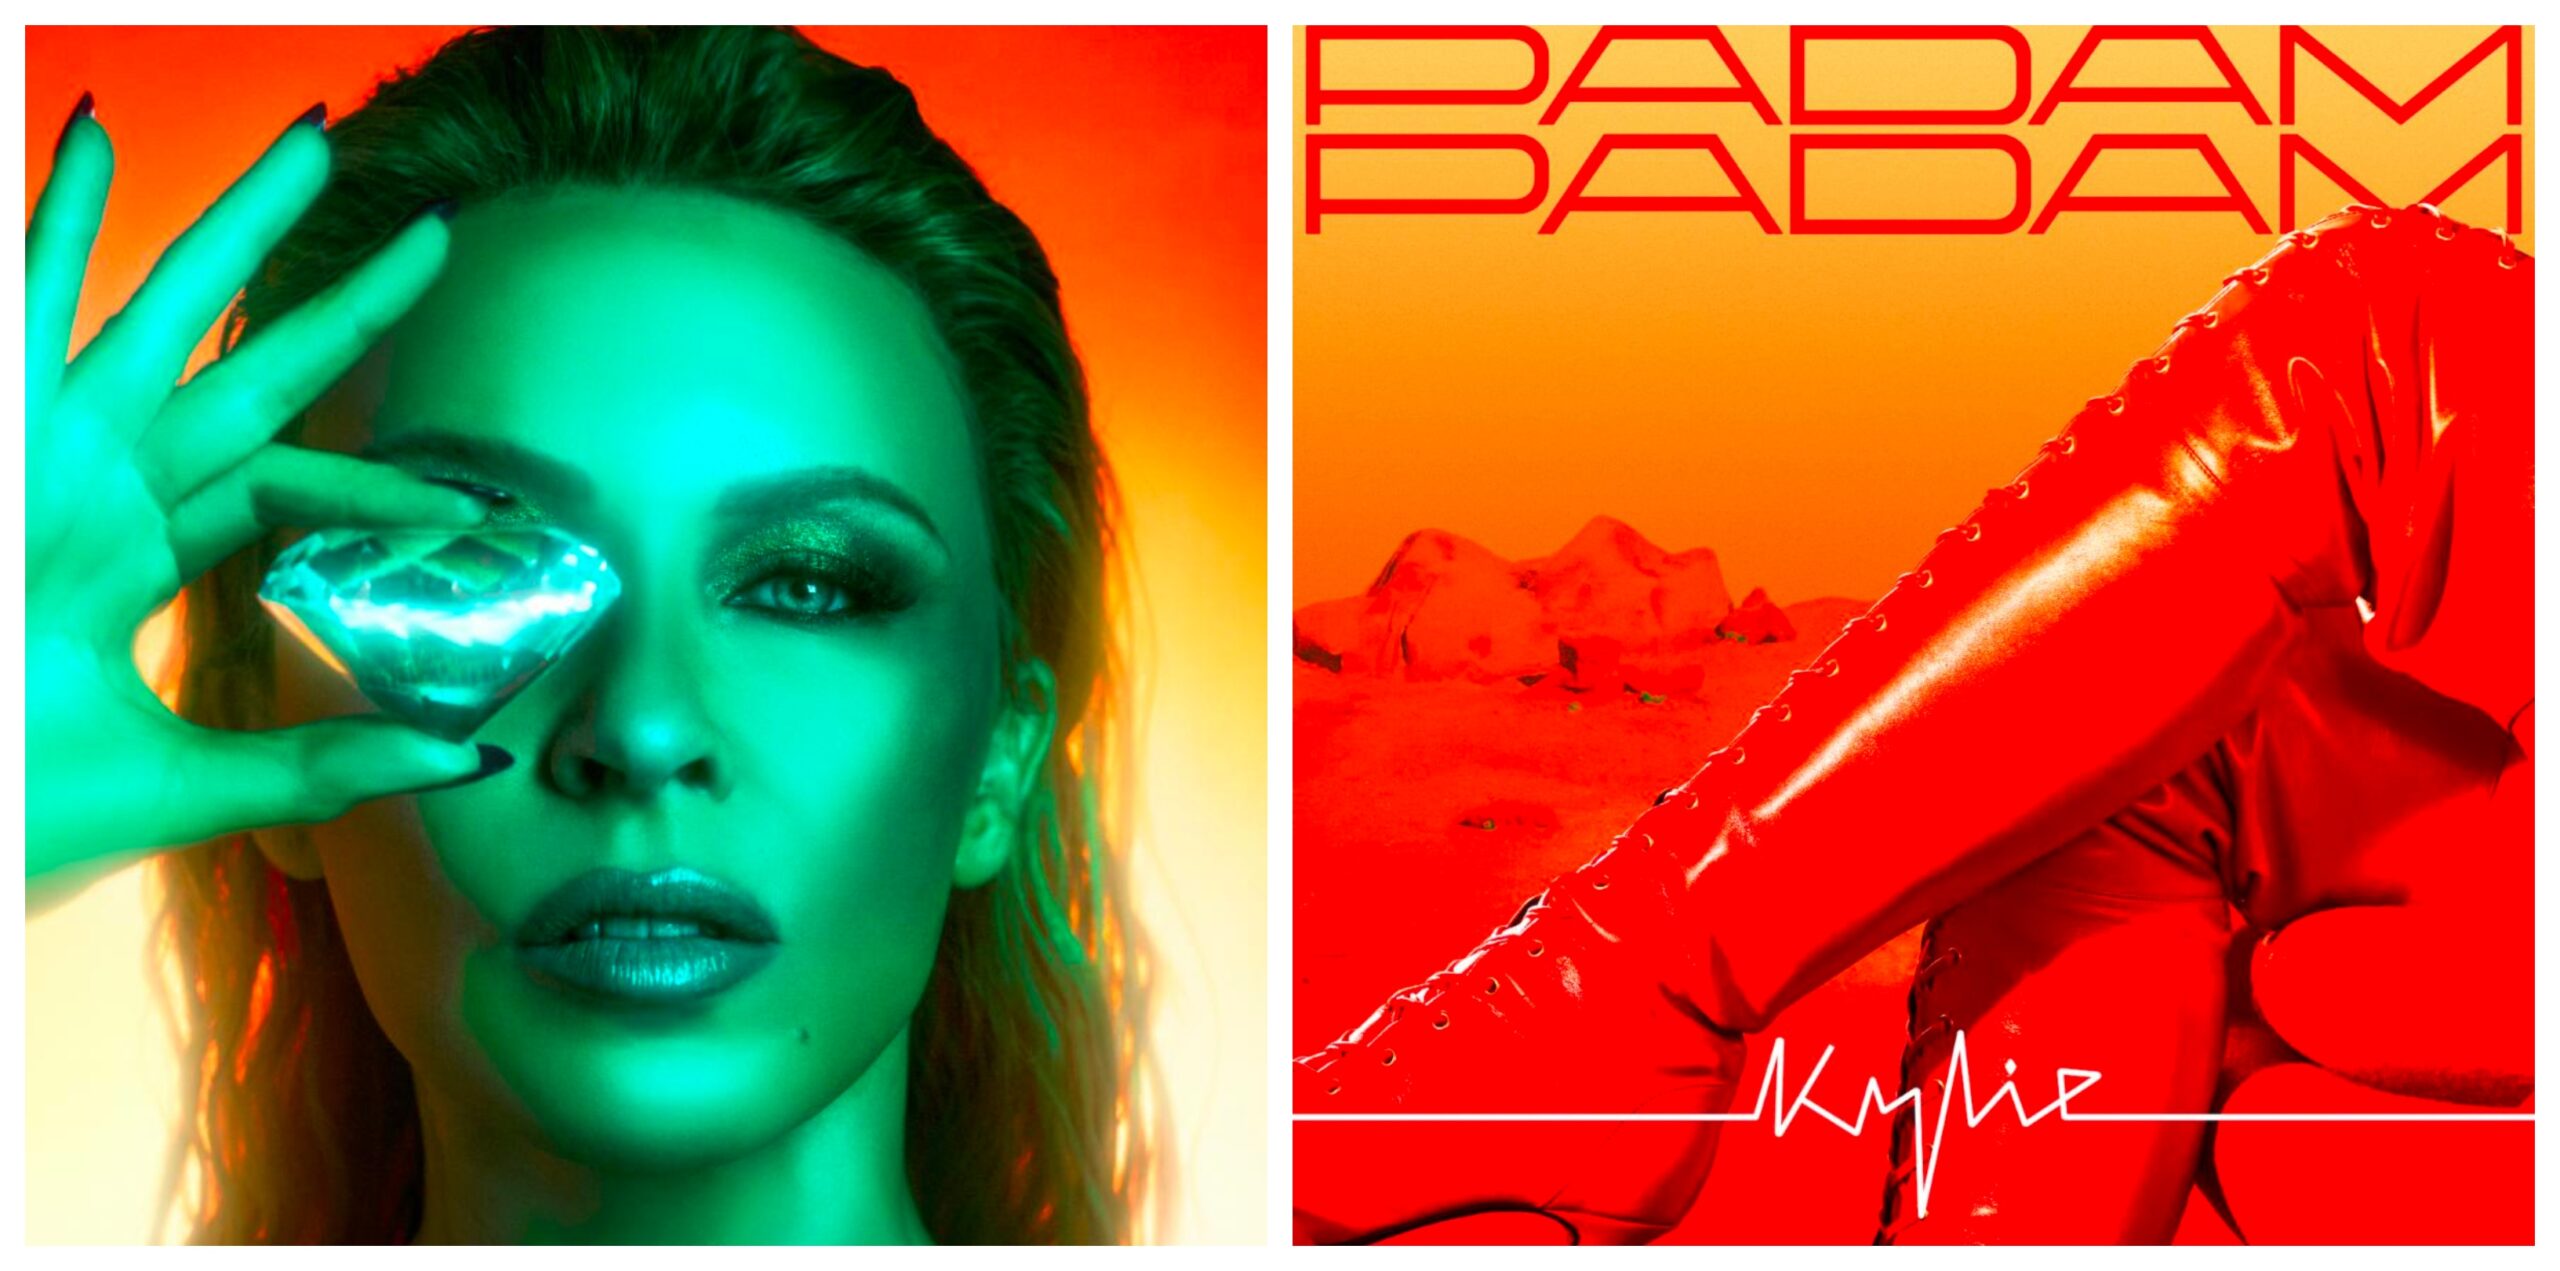 Kylie Minogue’s ‘Padam Padam’ Challenging For Top 20 Entry On The UK Charts